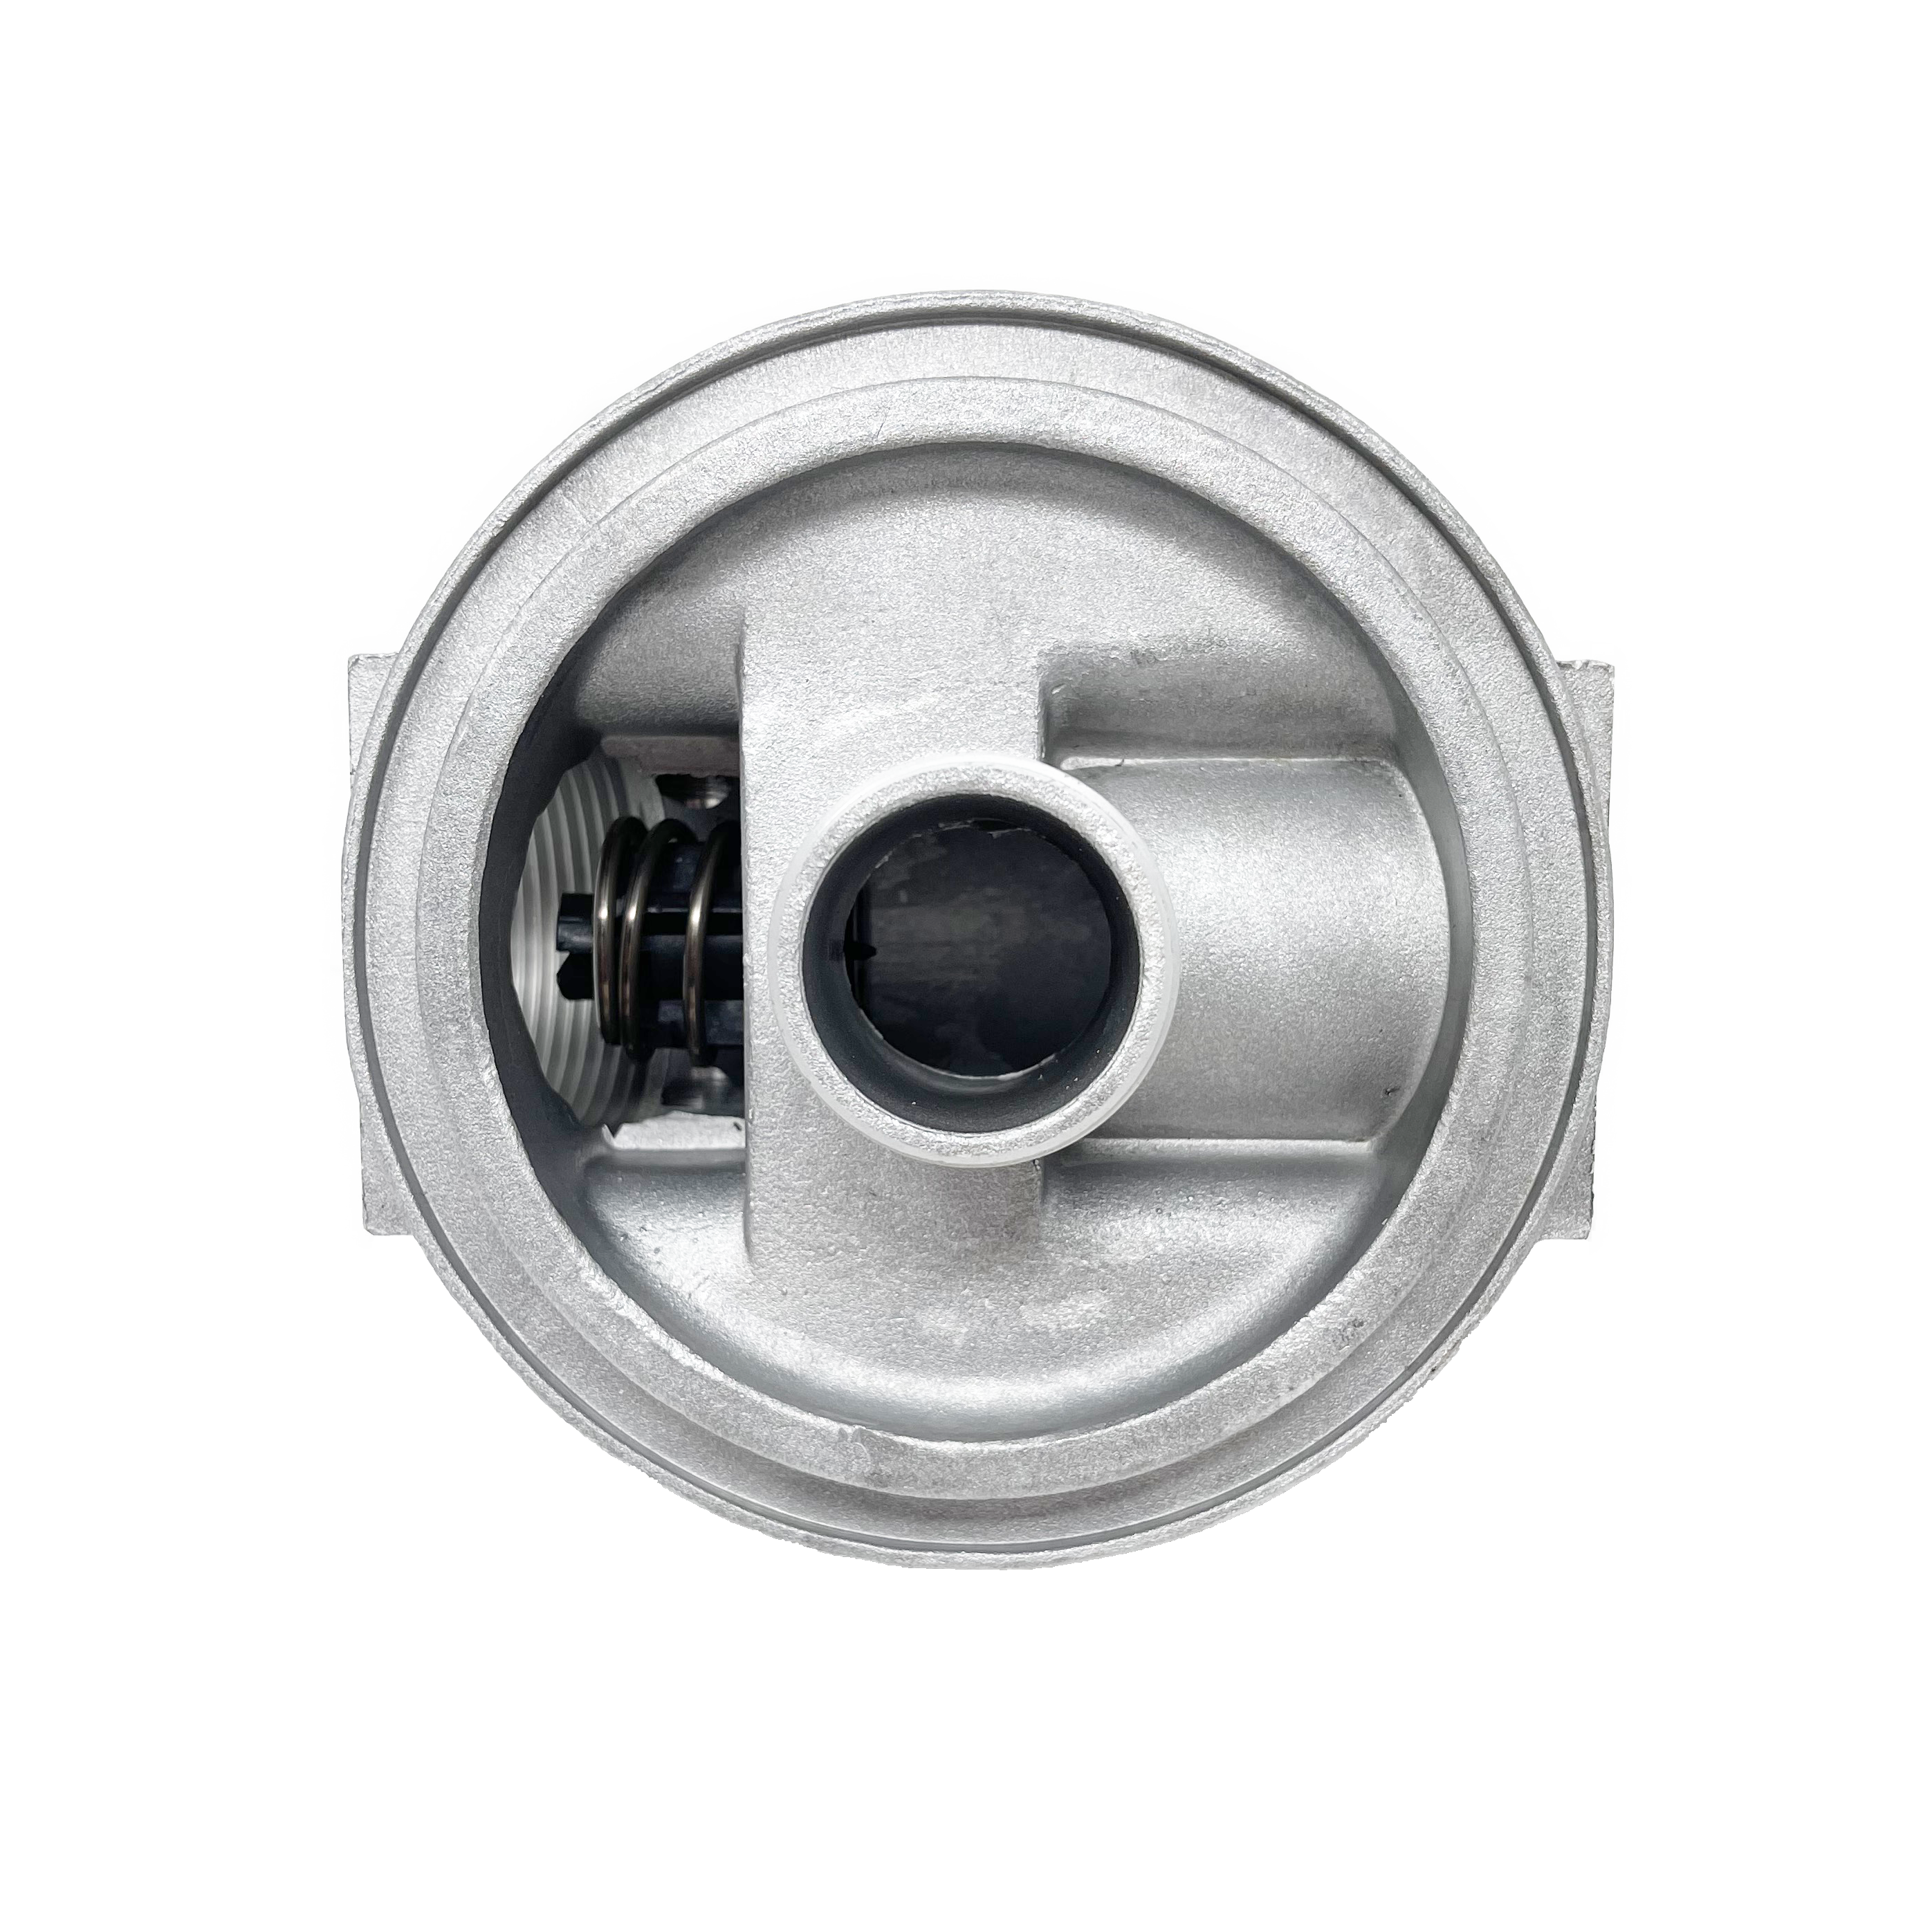 SSF-150-B1.7-1 : Stauff SSF Spin-On Filter Head, 80 GPM, 200psi, 1.5" NPT, with Bypass, Clogging indicator port drilled for return